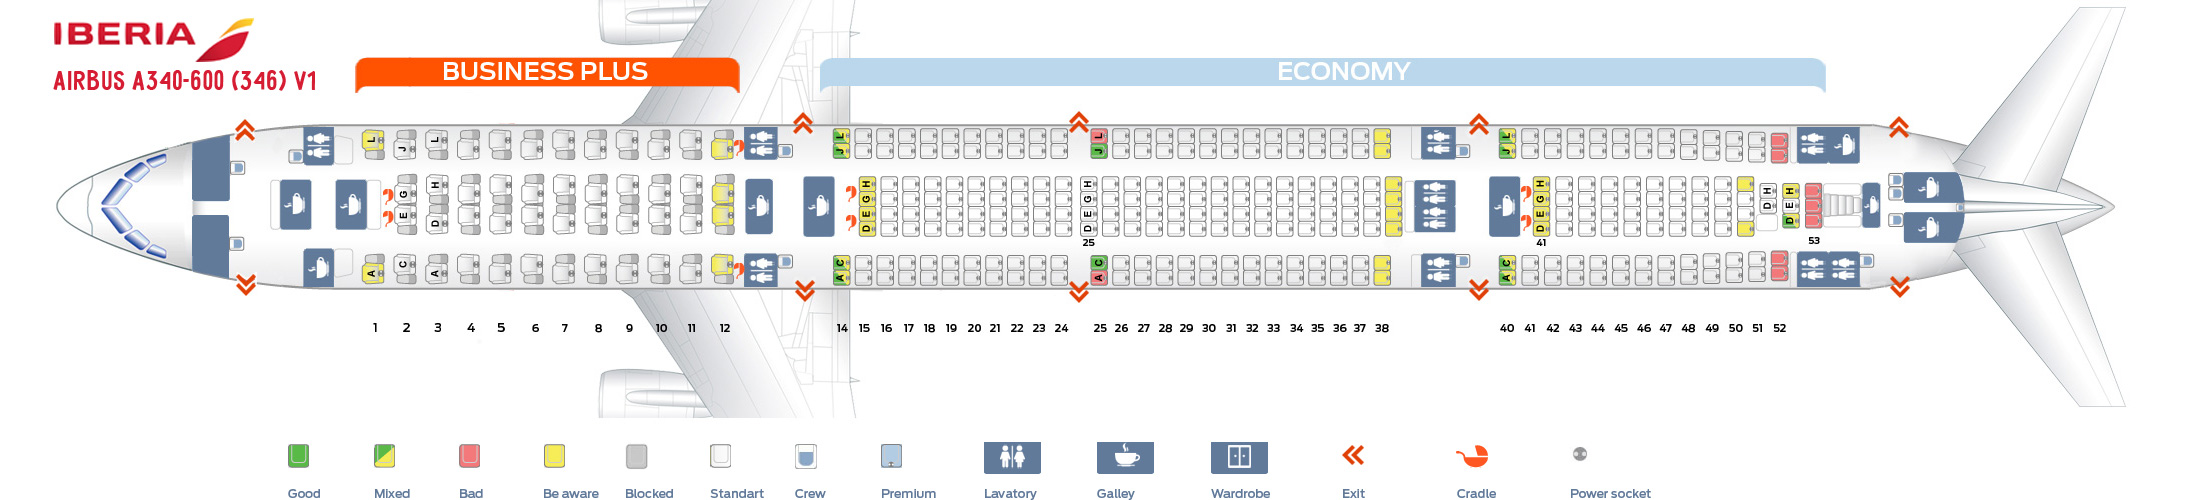 Airbus A340 Jet Seating Chart